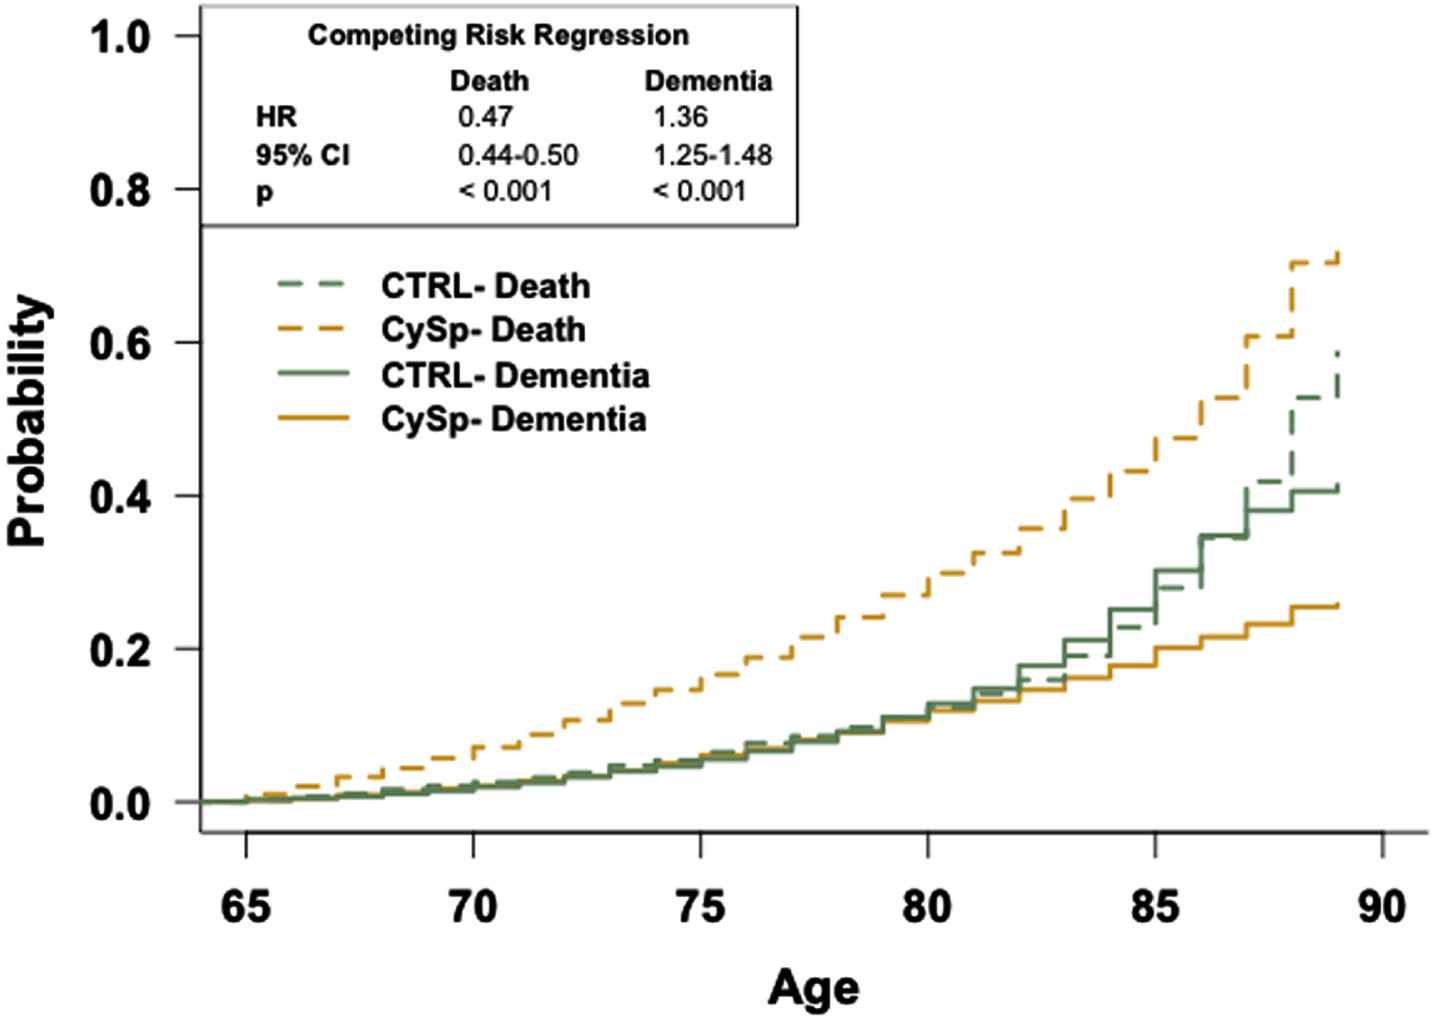 The general population has an increased risk of dementia relative to patients prescribed cyclosporine. Competing risk regression analysis of dementia and death between patients prescribed cyclosporine or in the general population-like control. Patients in the general population-like control have an increased risk of dementia but a decreased risk of death. n = 12,325 patients/cohort. CRR, competing risk regression; HR, hazard ratio; CI, confidence interval.